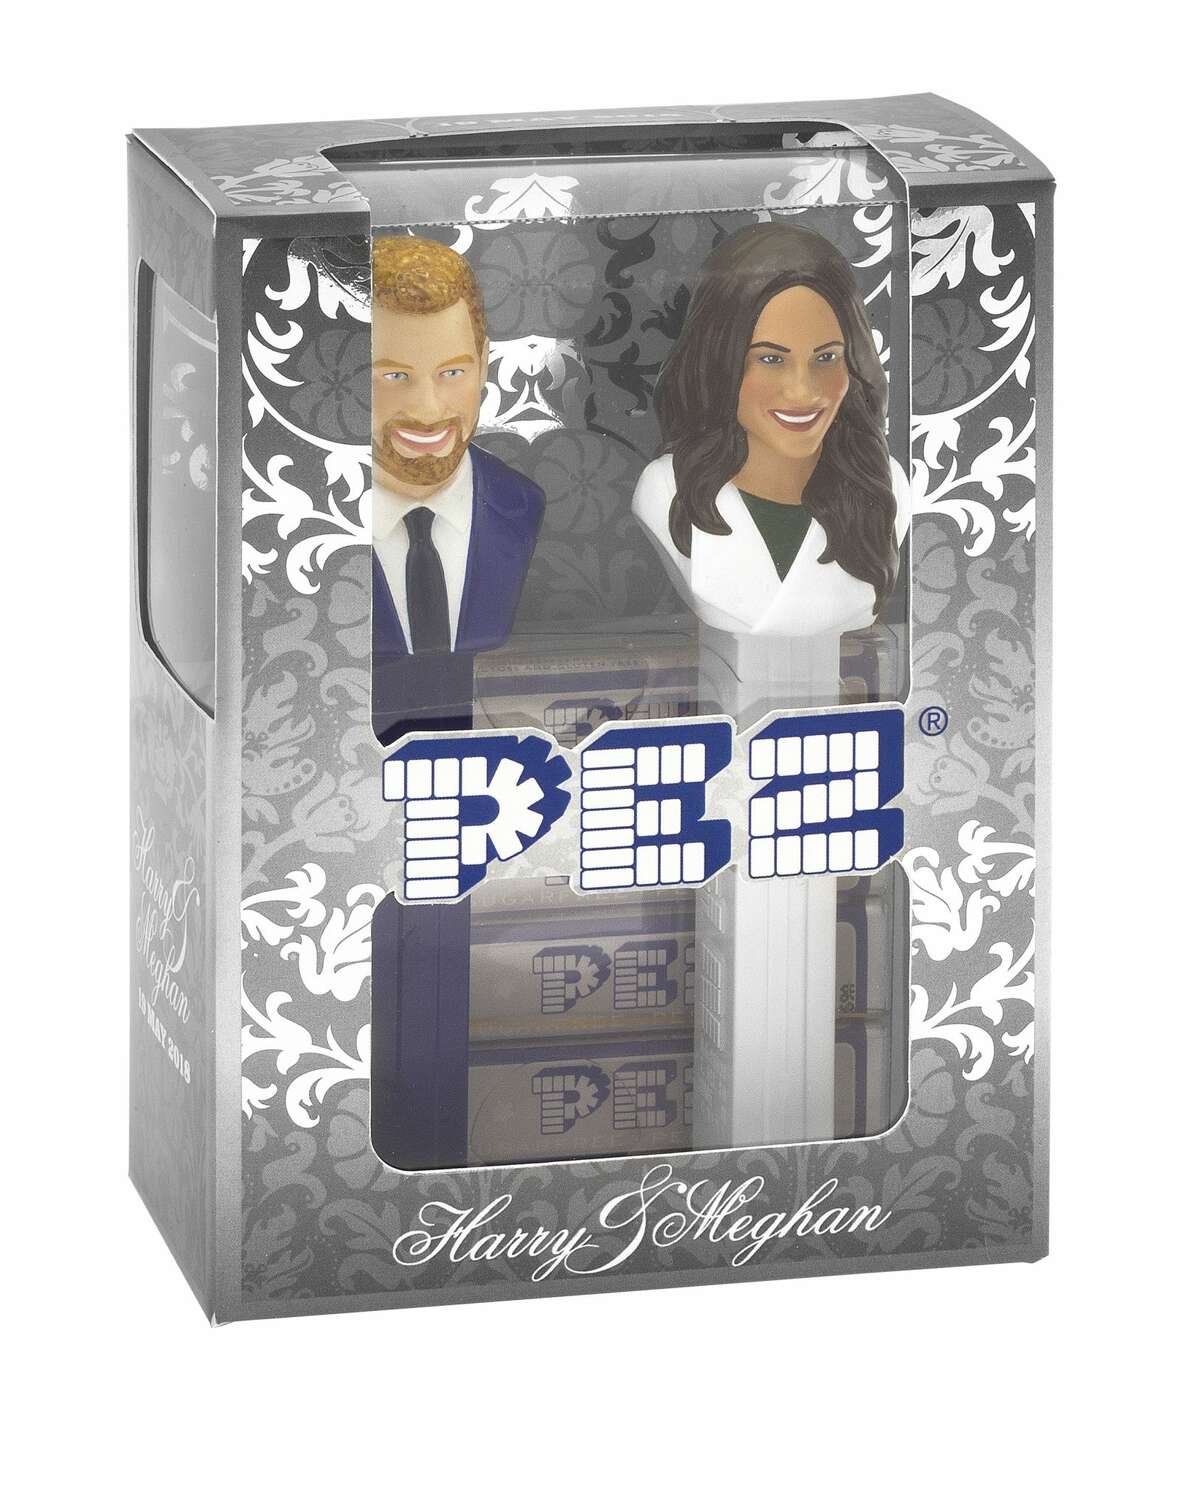 In this image released on Wednesday, May 2, 2018, Austrian sweets manufacturer PEZ has developed an exclusive souvenir for the wedding of the year. Fans of the happy couple and of the cult-brand can join in the bidding for a distinctive dispenser set, the only one of its kind in the world.